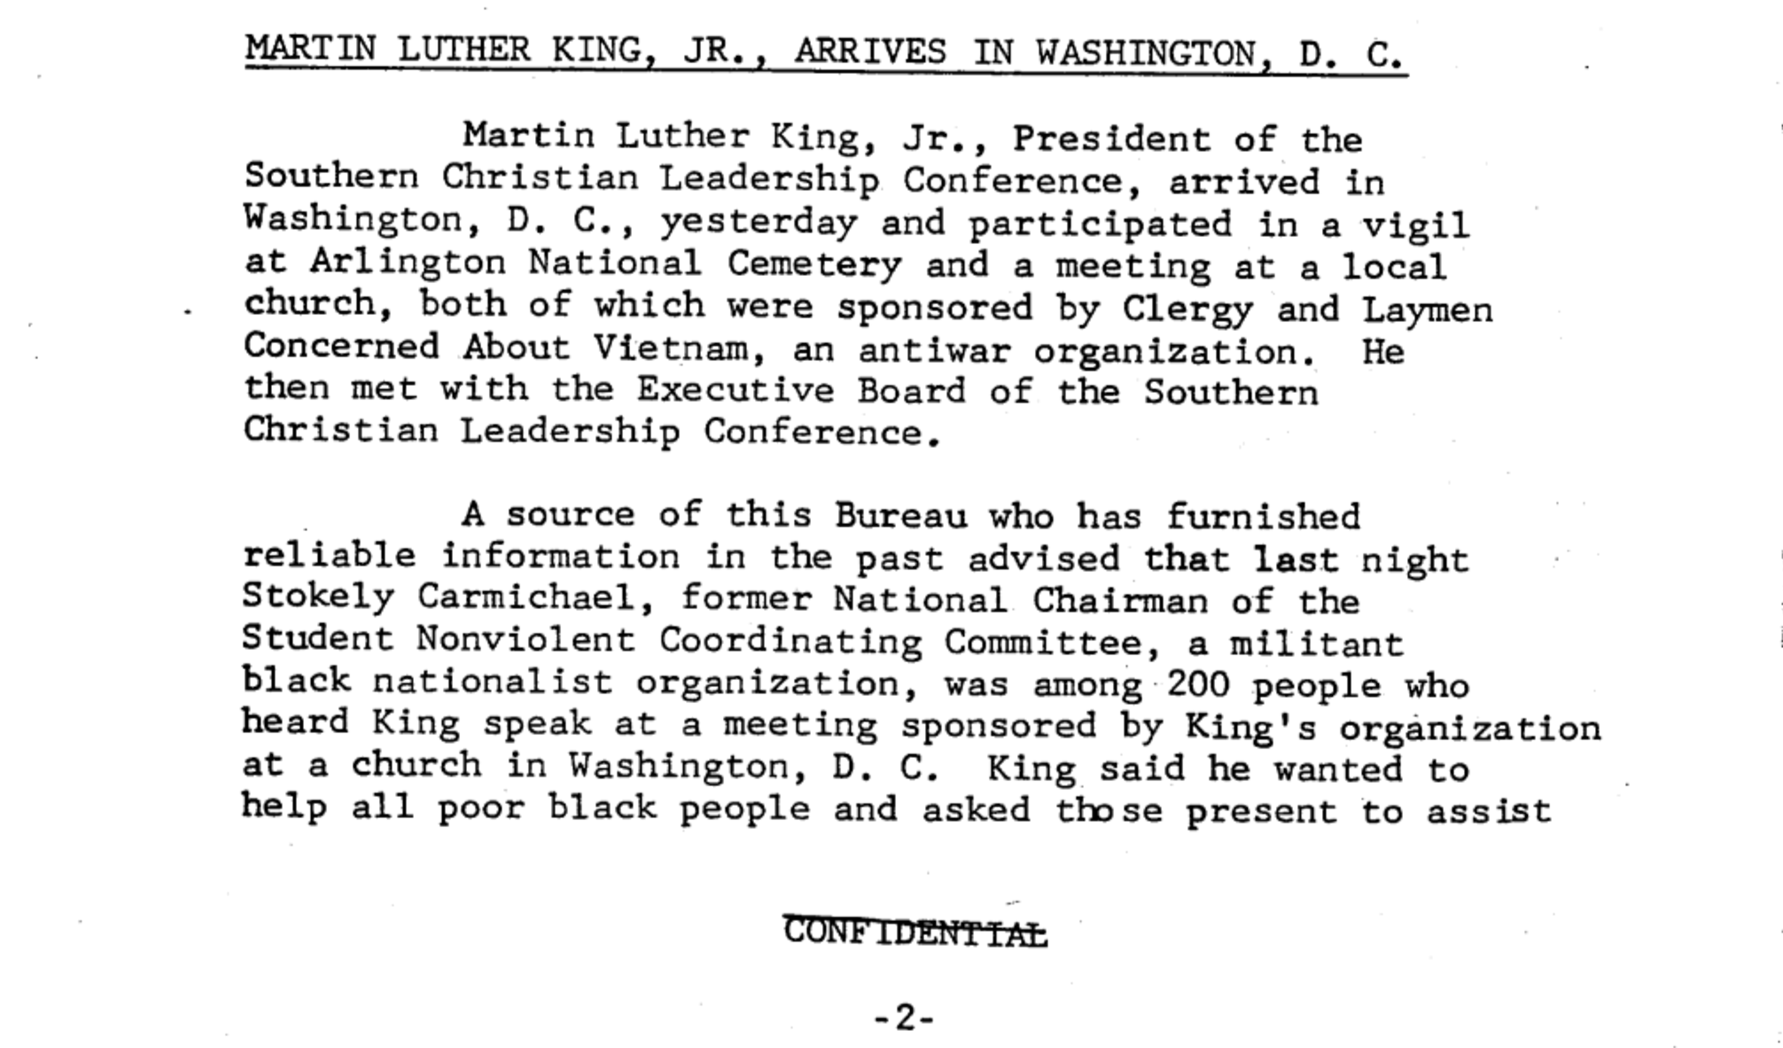 Research report on martin luther king